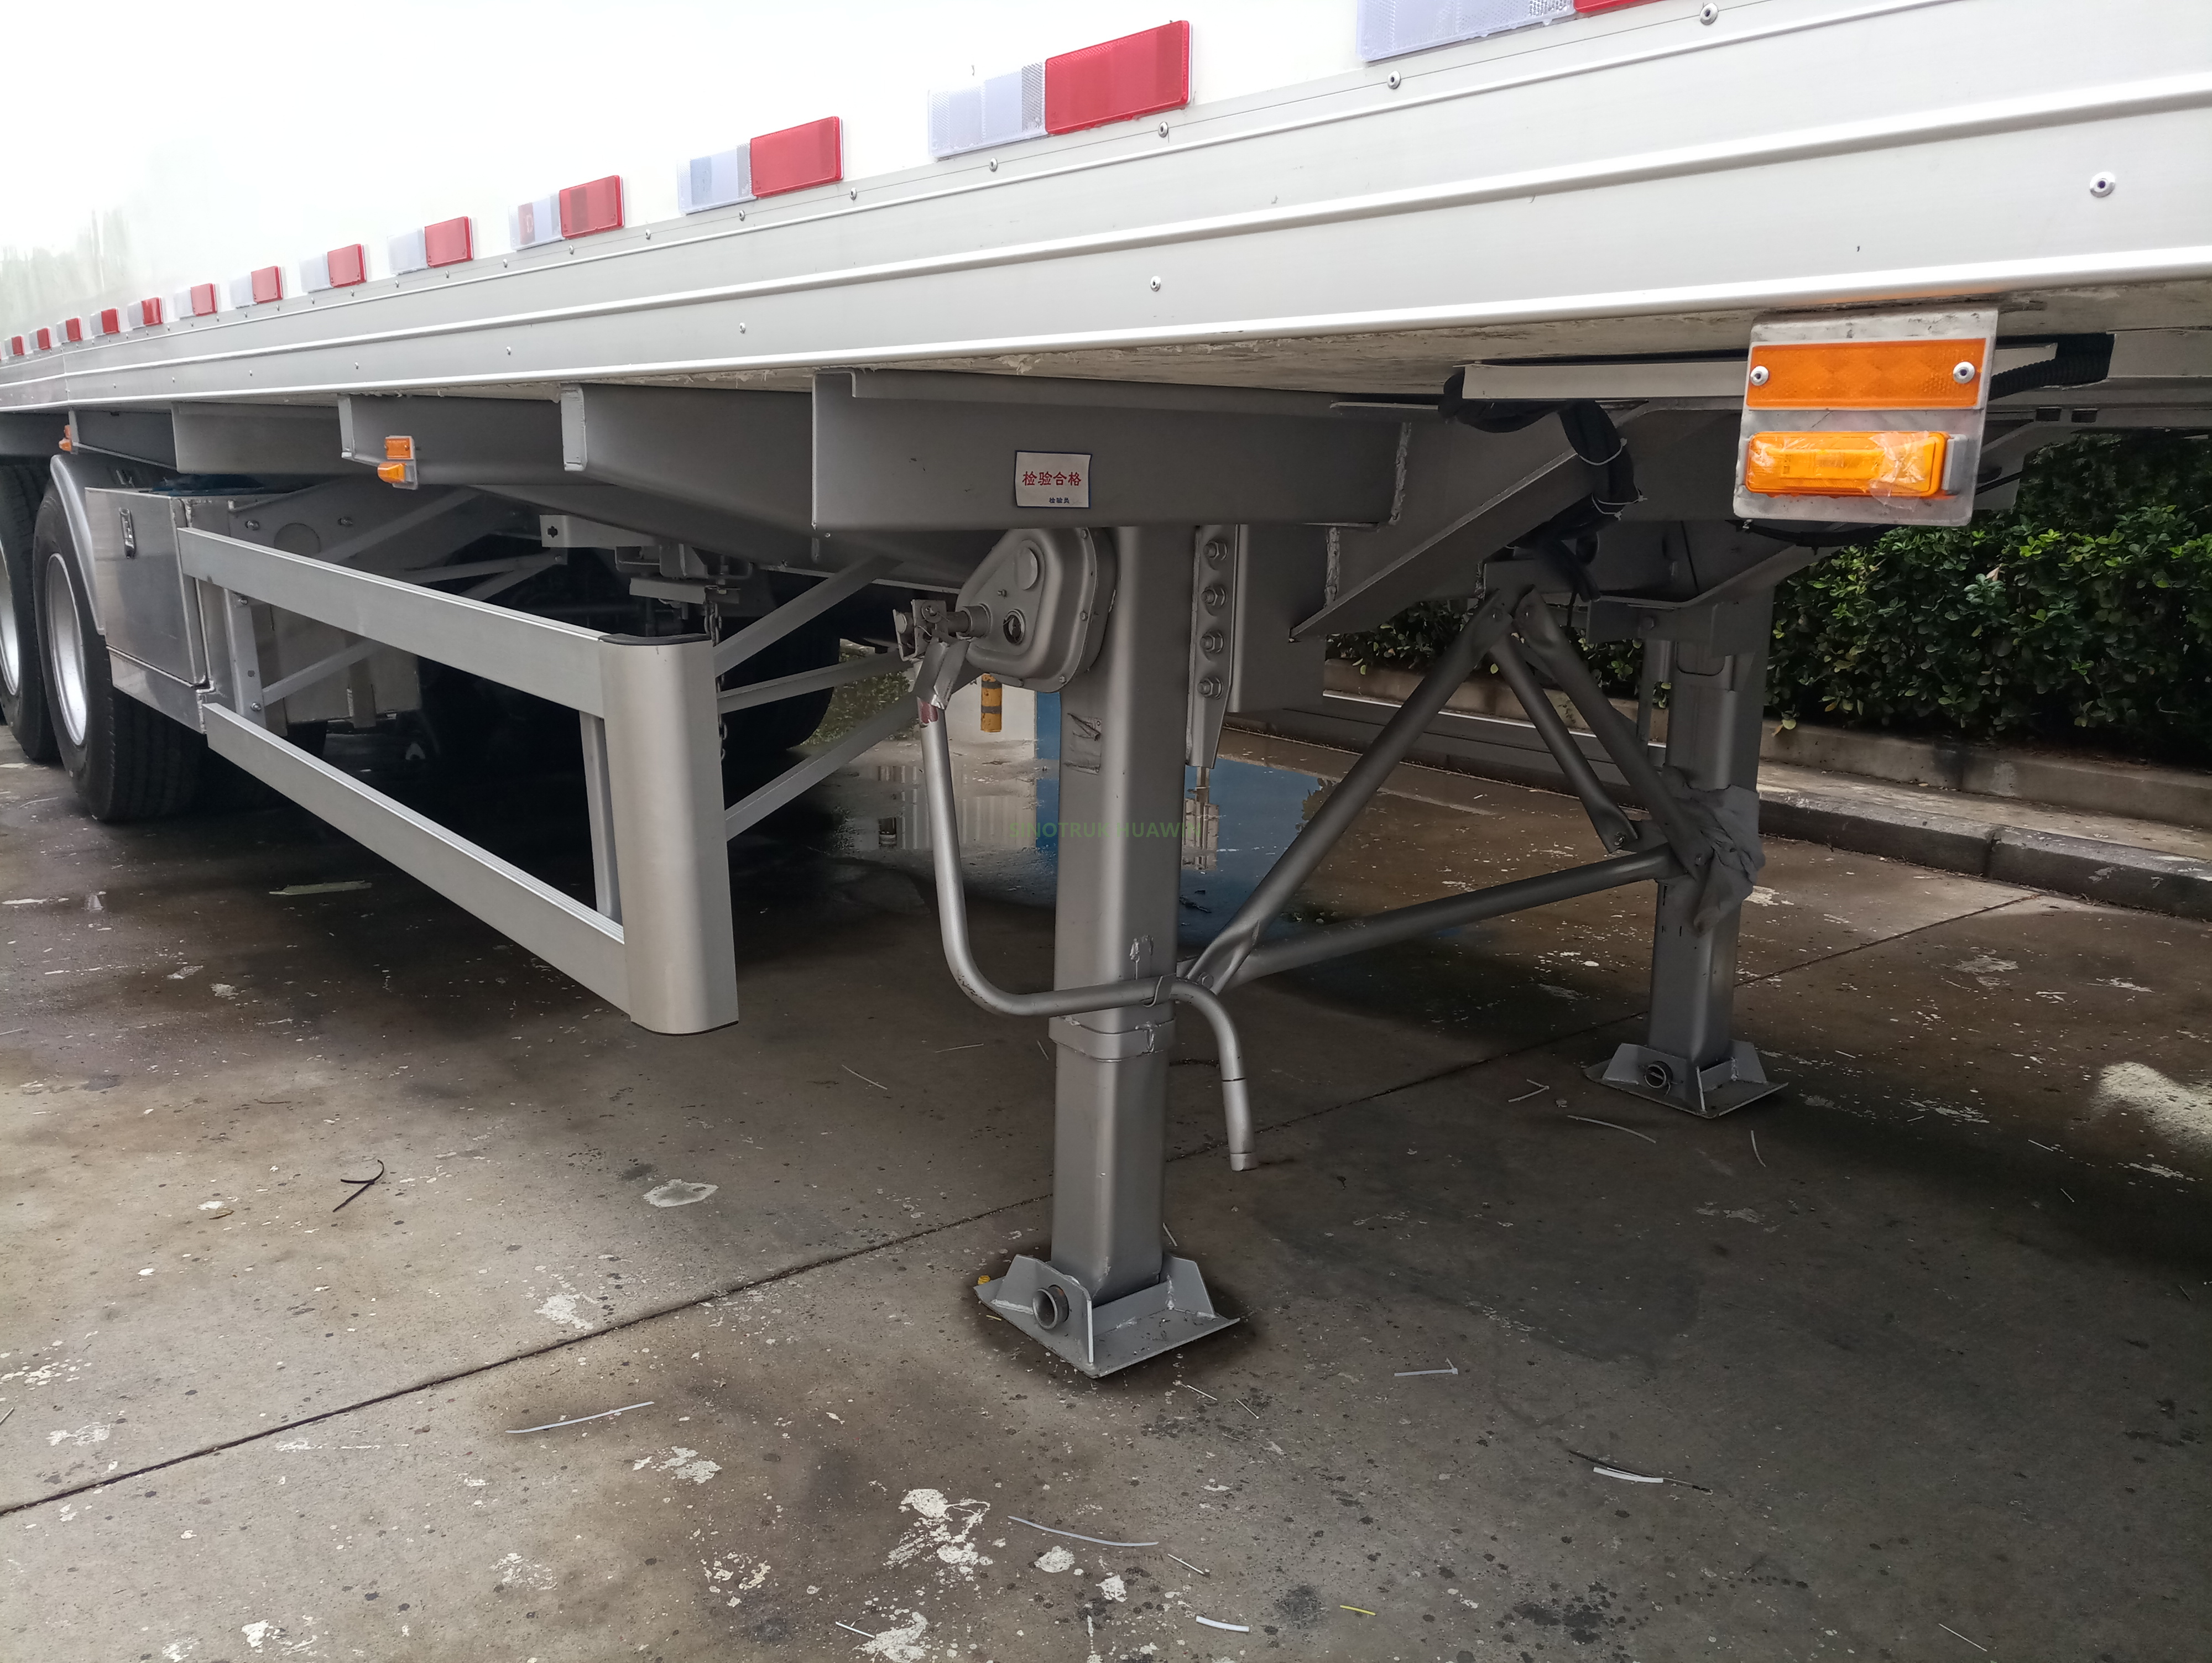 SINOTRUK Refrigerator Semi Trailer with high quality for sale